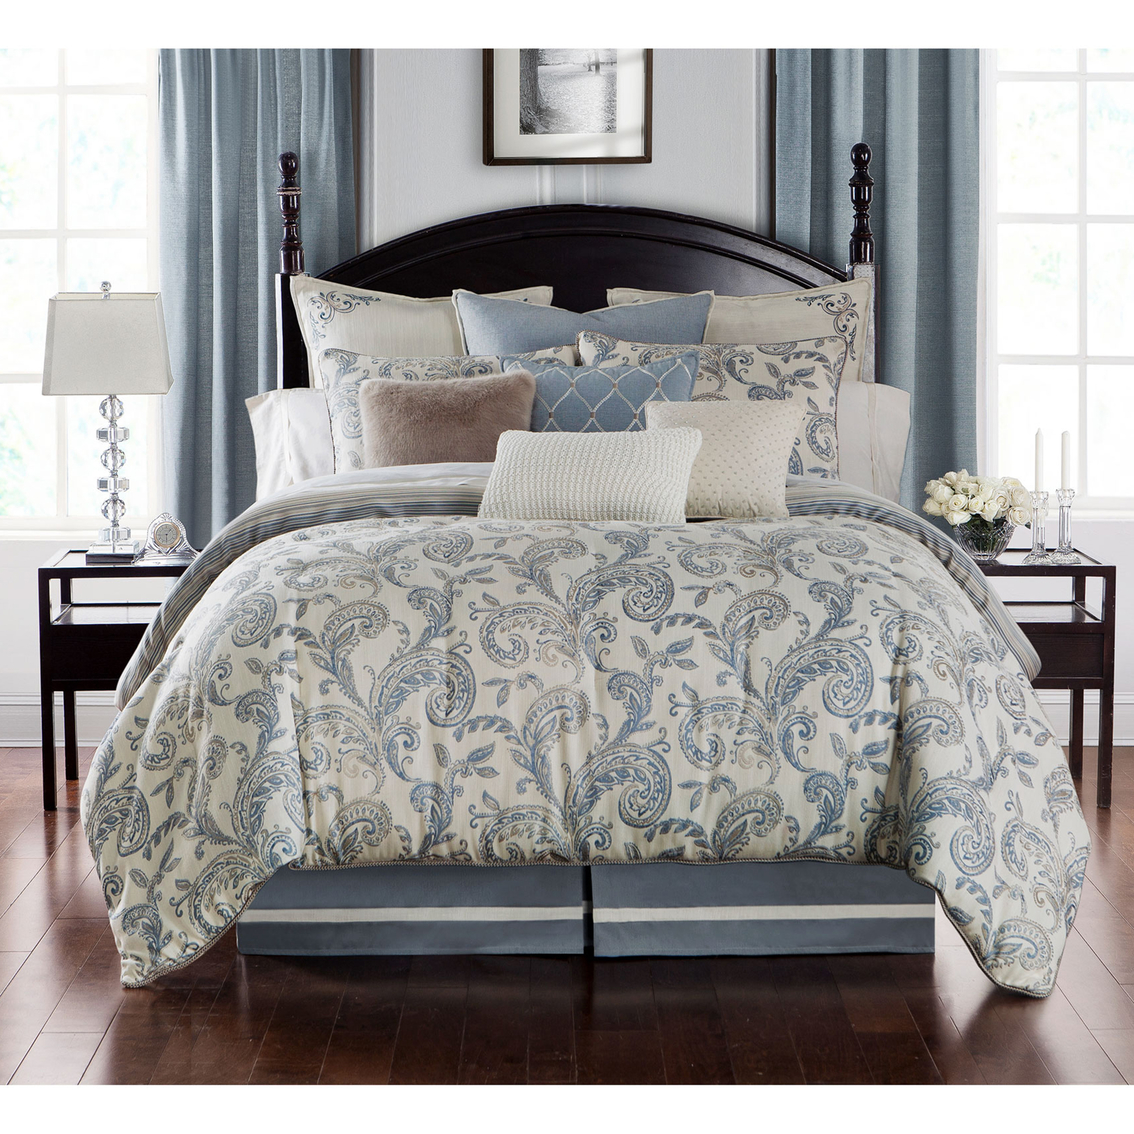 Waterford Florence Chambray Blue Comforter Set - Image 2 of 5